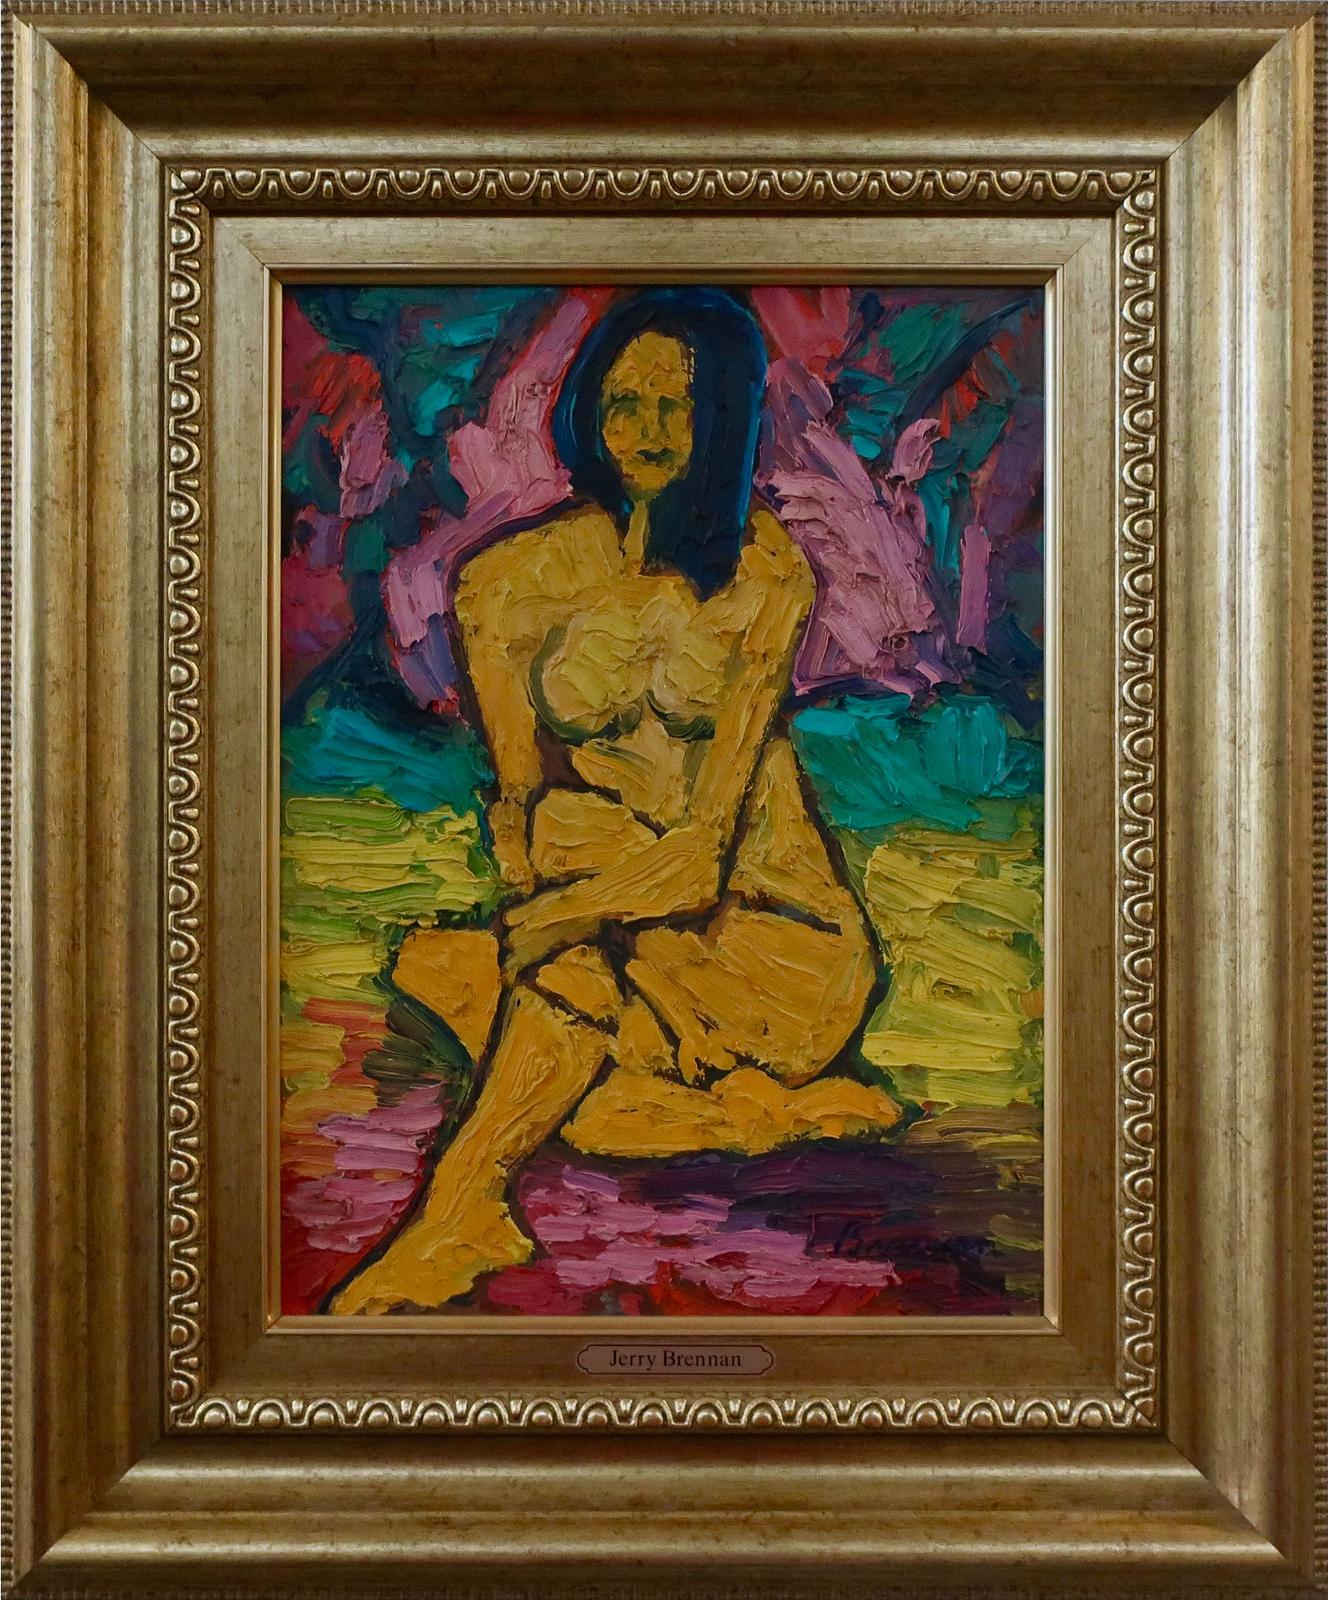 Jerry Brennan (1950) - Seated Nude